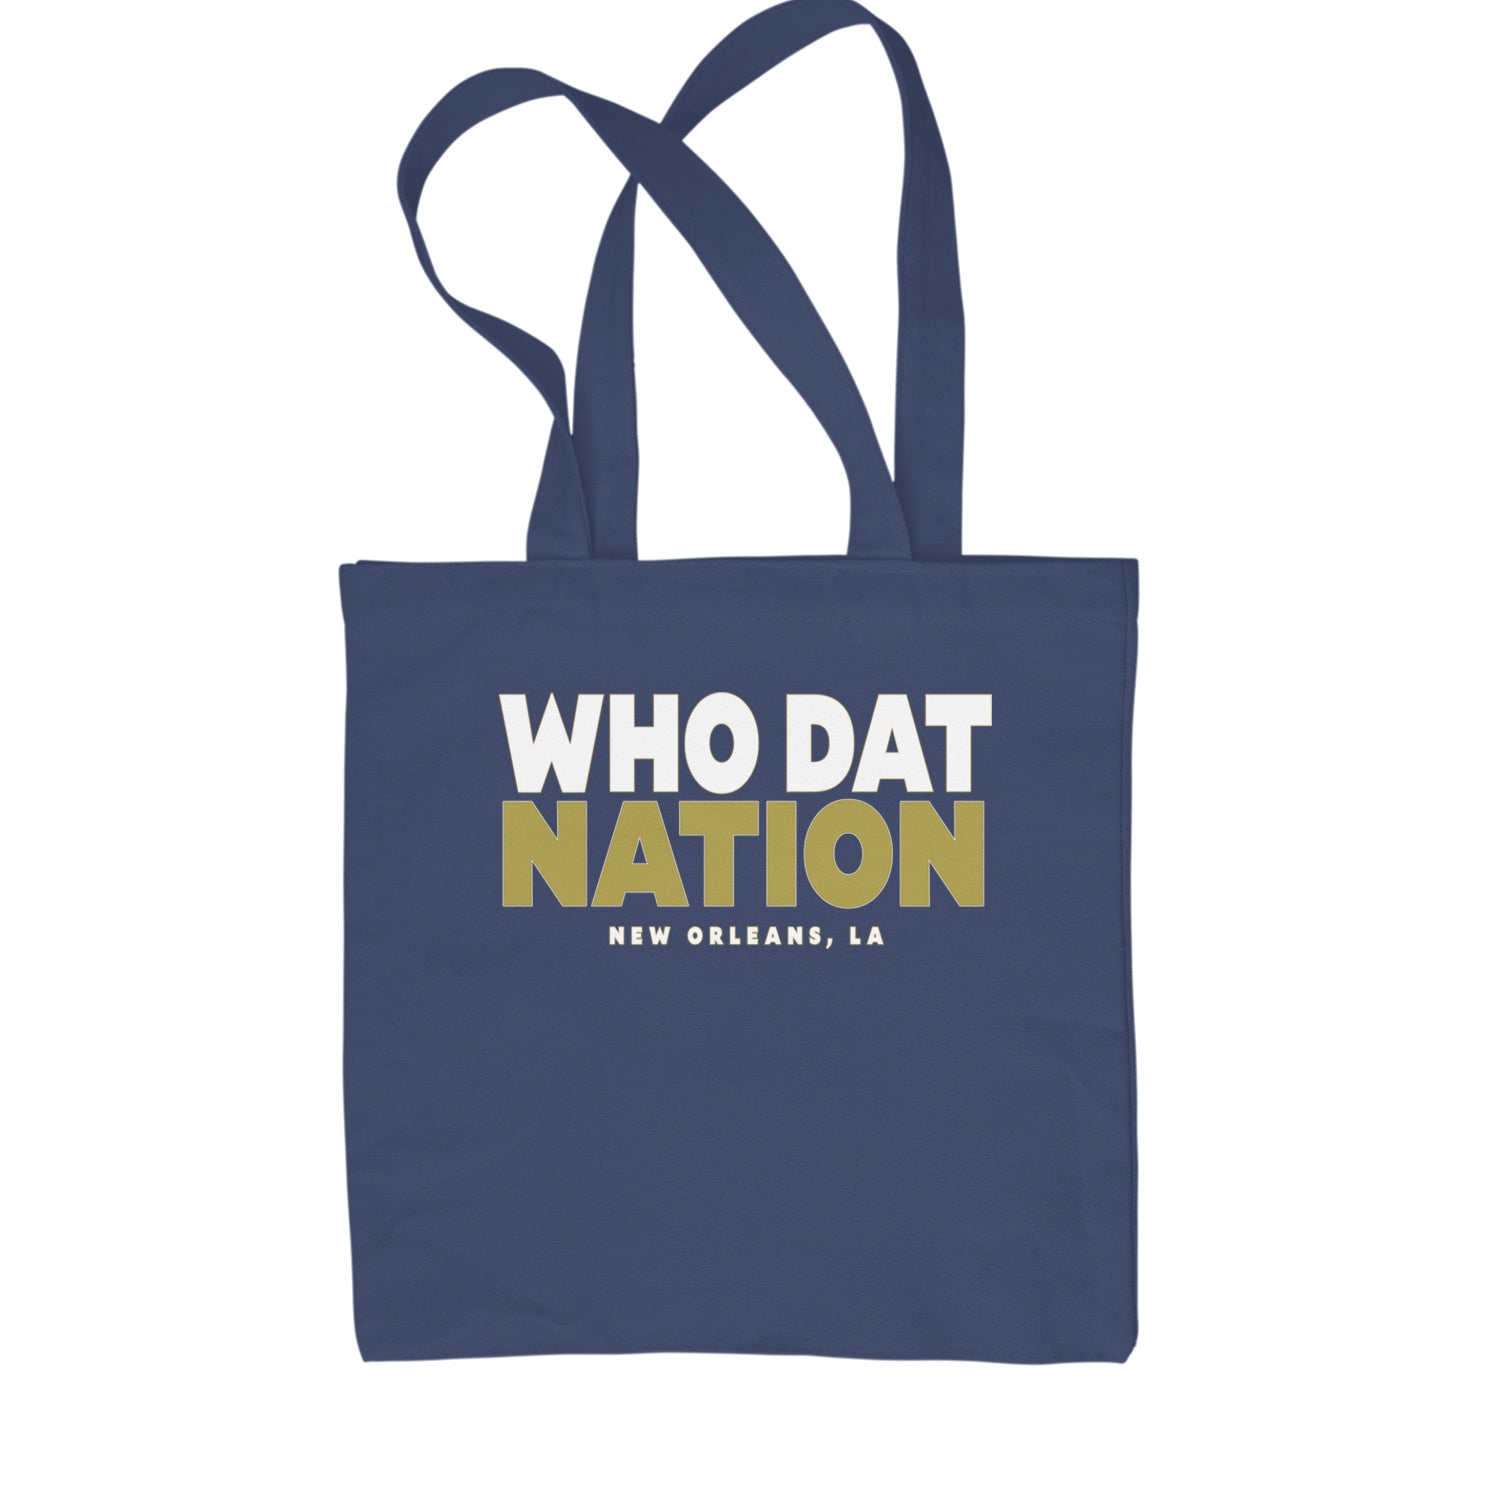 New Orleans Who Dat Nation Shopping Tote Bag Navy Blue